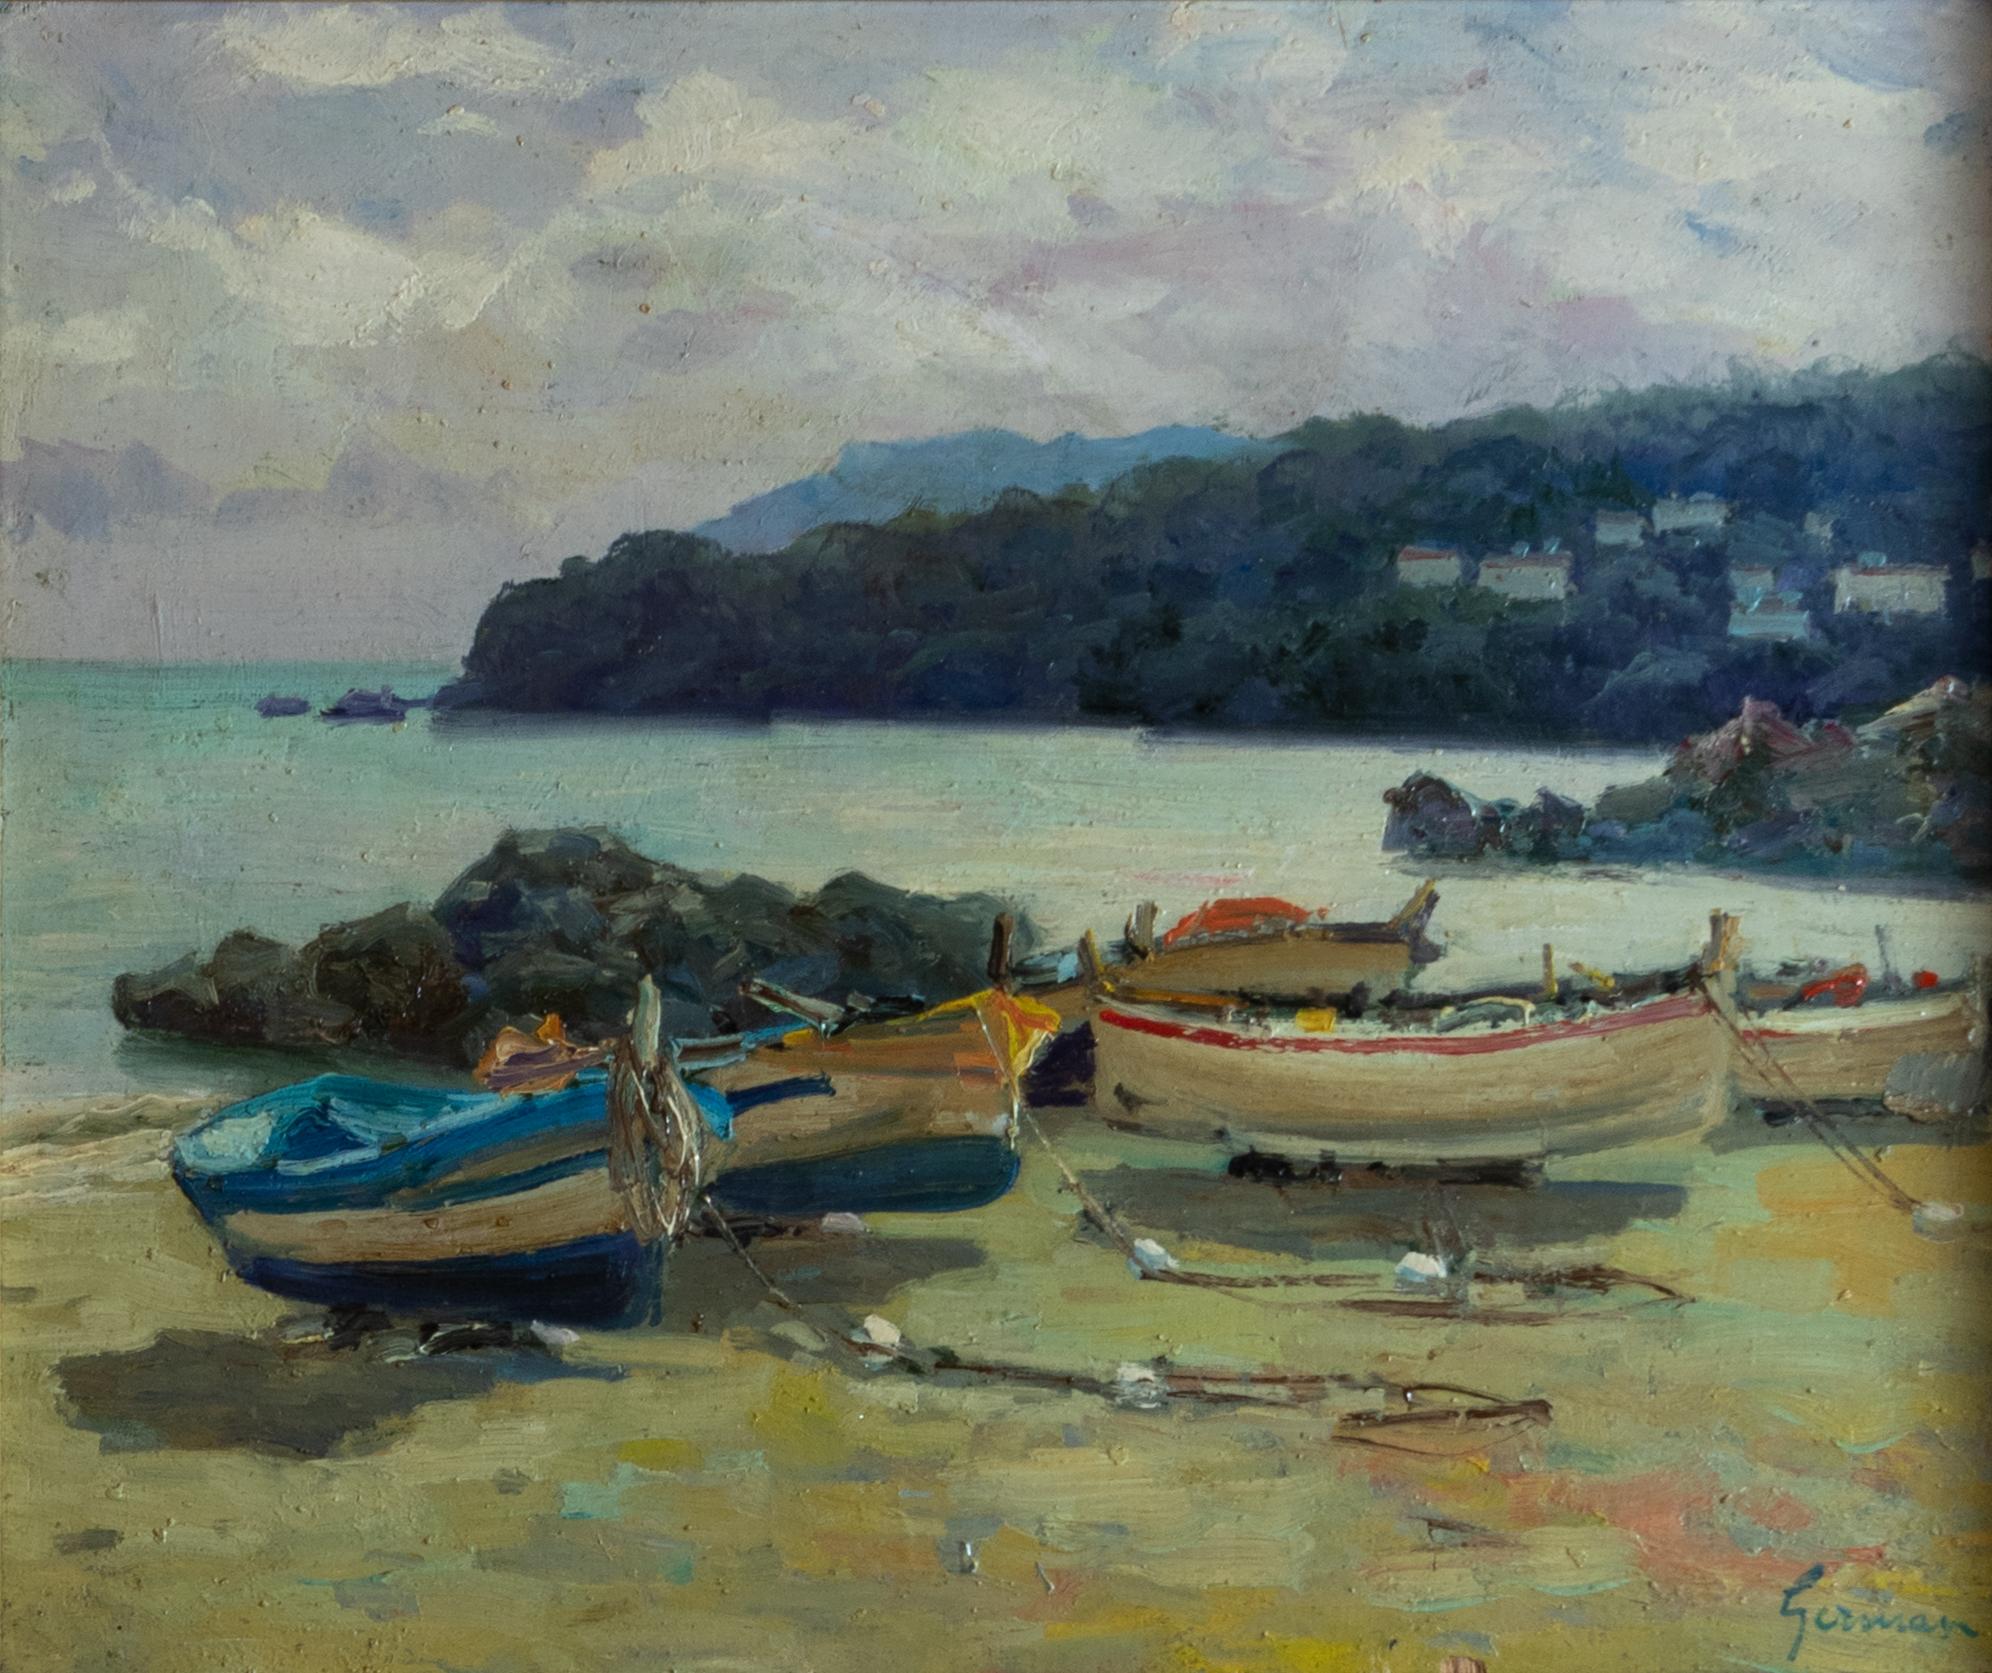 A Côte d'Azur maritime scene,  early 20th Century post-Impressionist
painting. 
Village and sea at the background of five fishing boats ashore.  
“Germain” signed on lower right - french painter Louis German (1863-1946)

Frame: 27,16 in (69 cm) x 